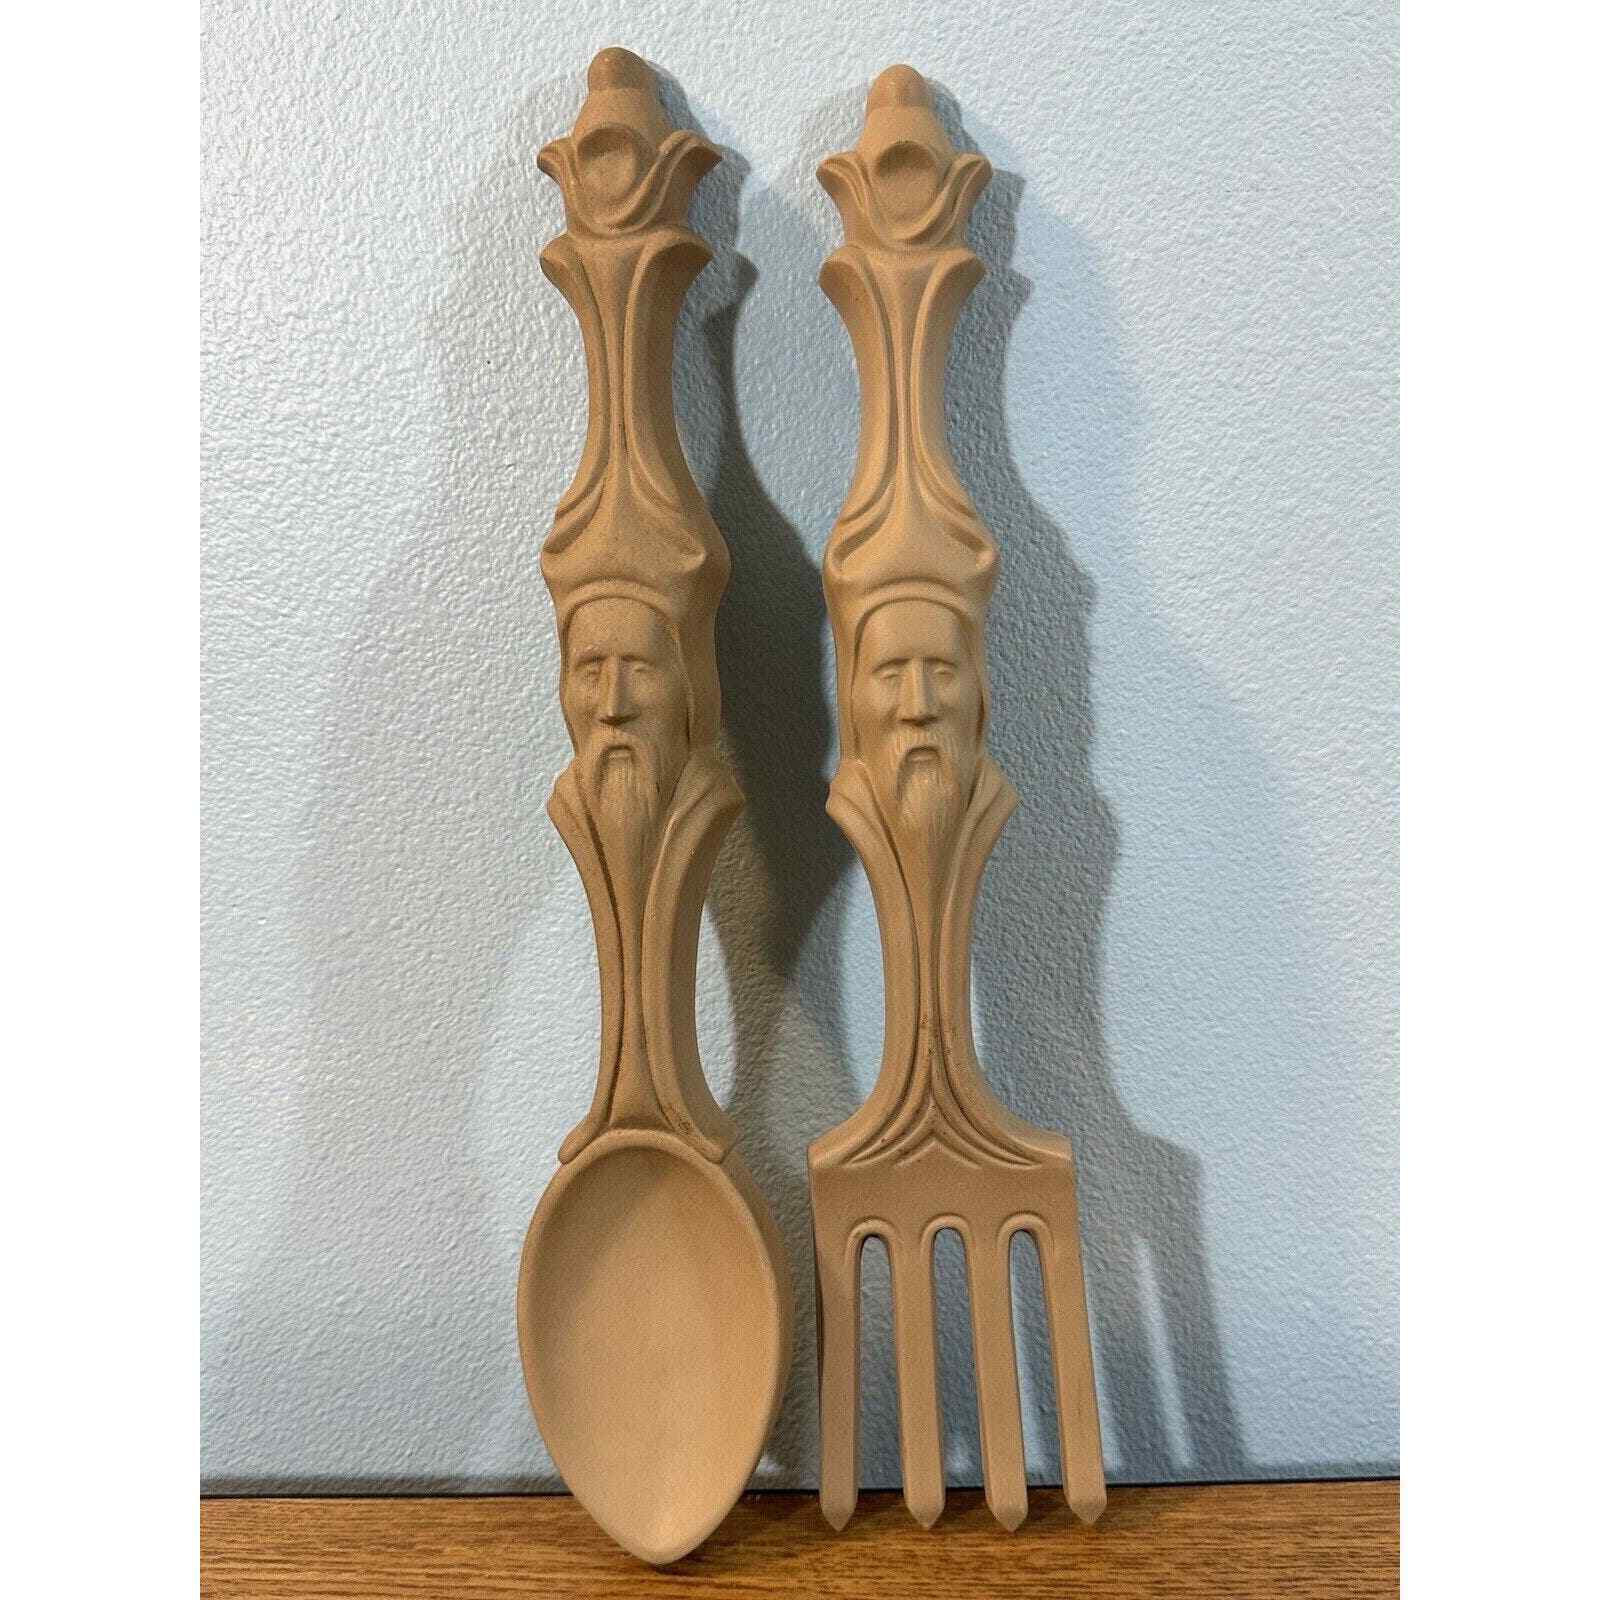 Ceramic Fork And Spoon Wall Art Vintage 70's 14” Tall Hanging Decor Kitchen Home